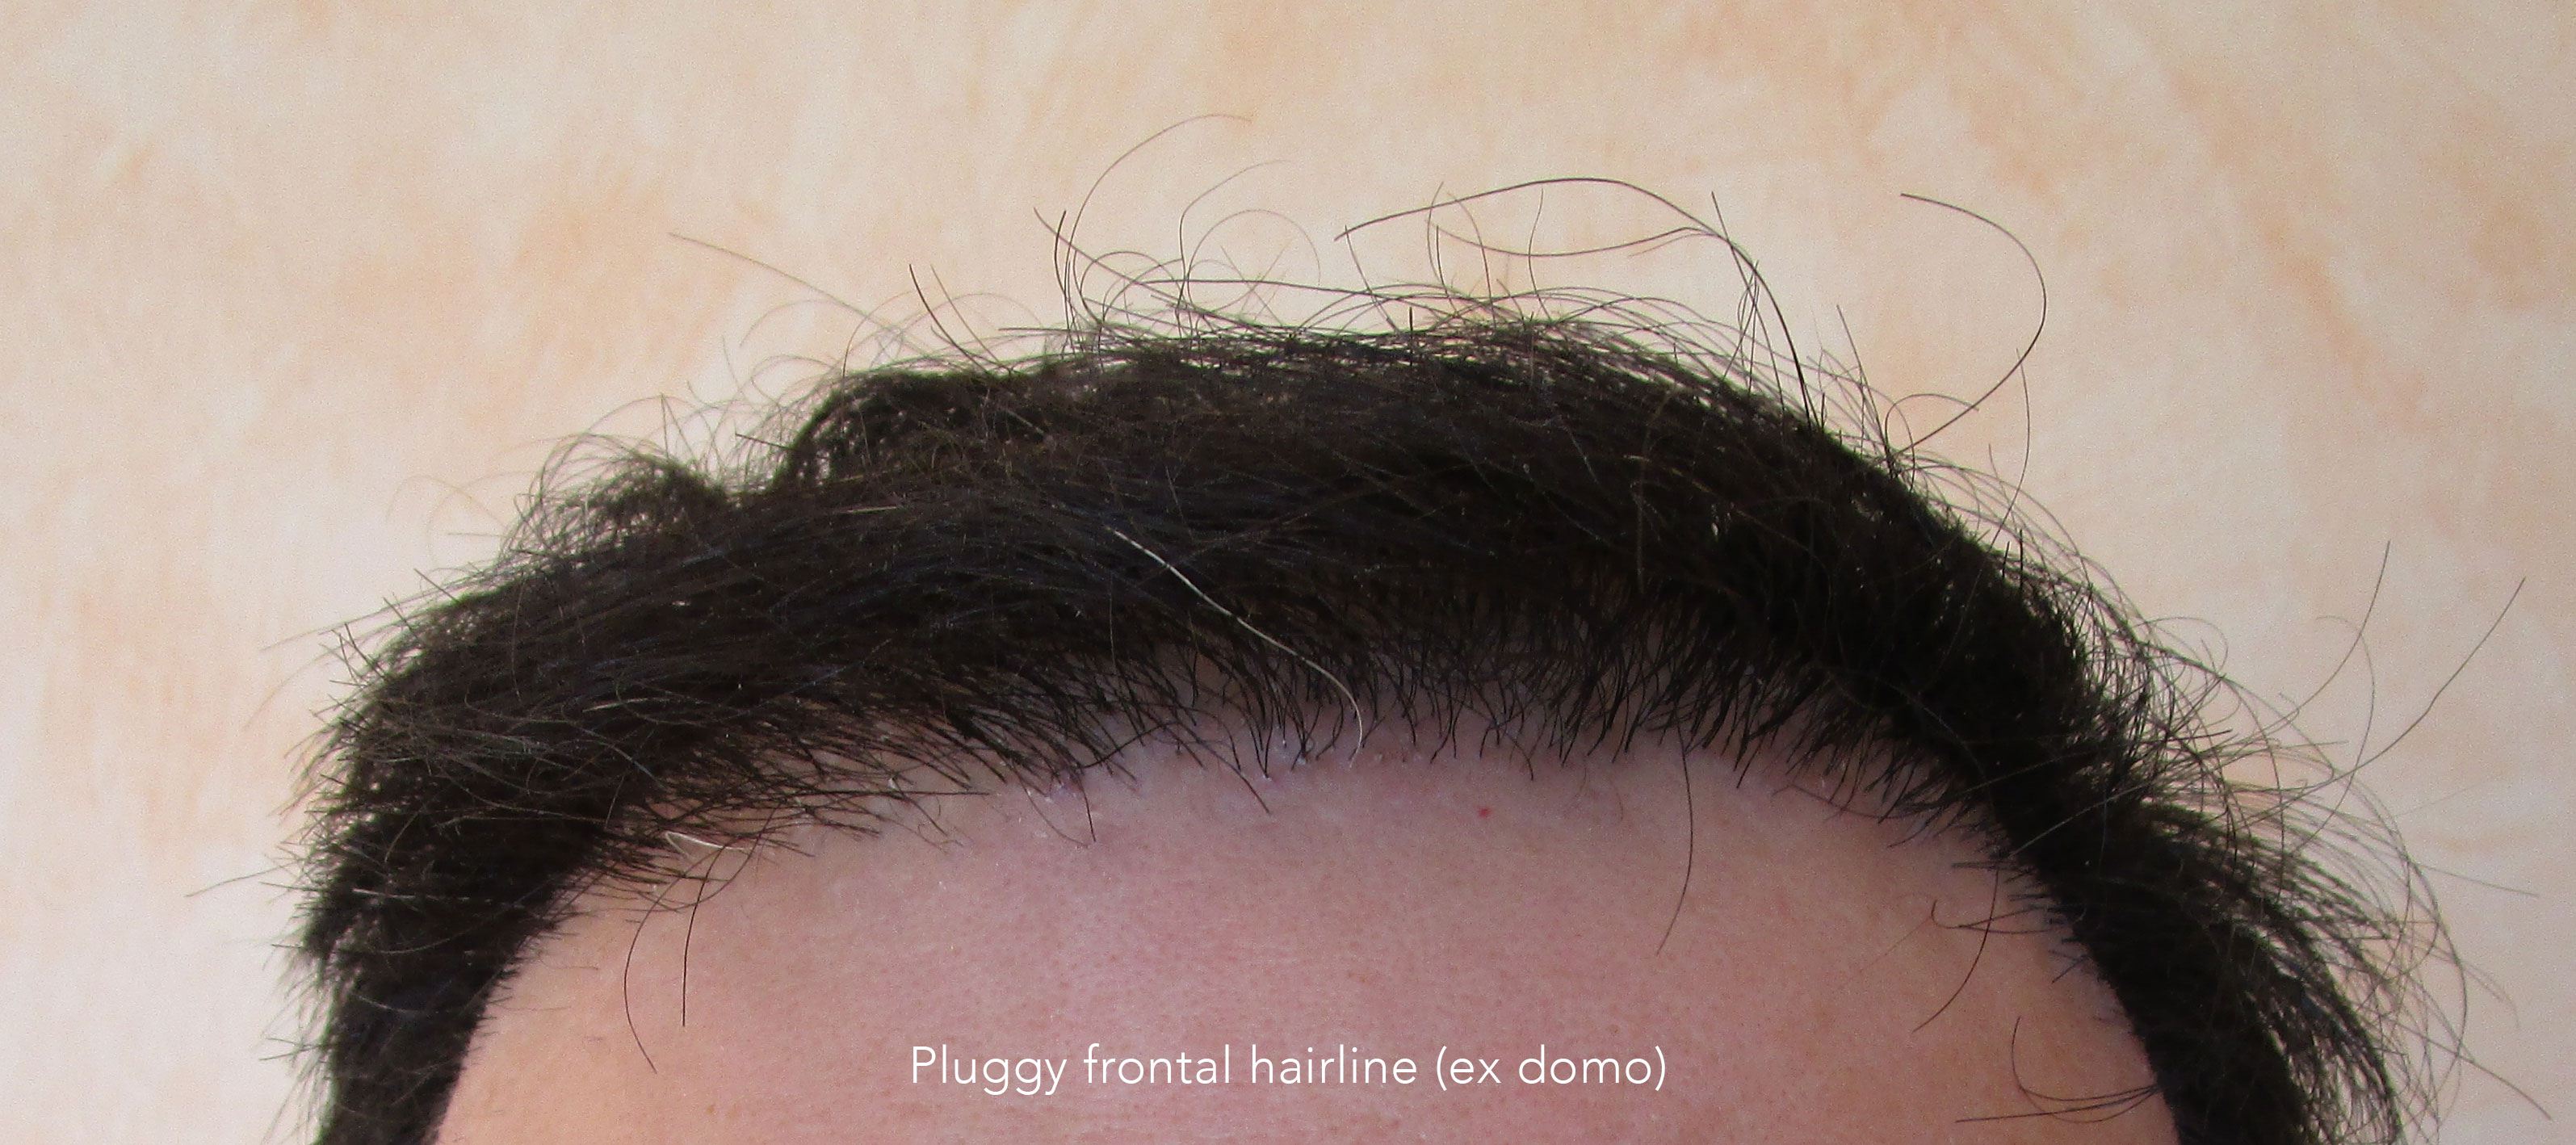 Preop1-hairline Results - Dr. Feriduni